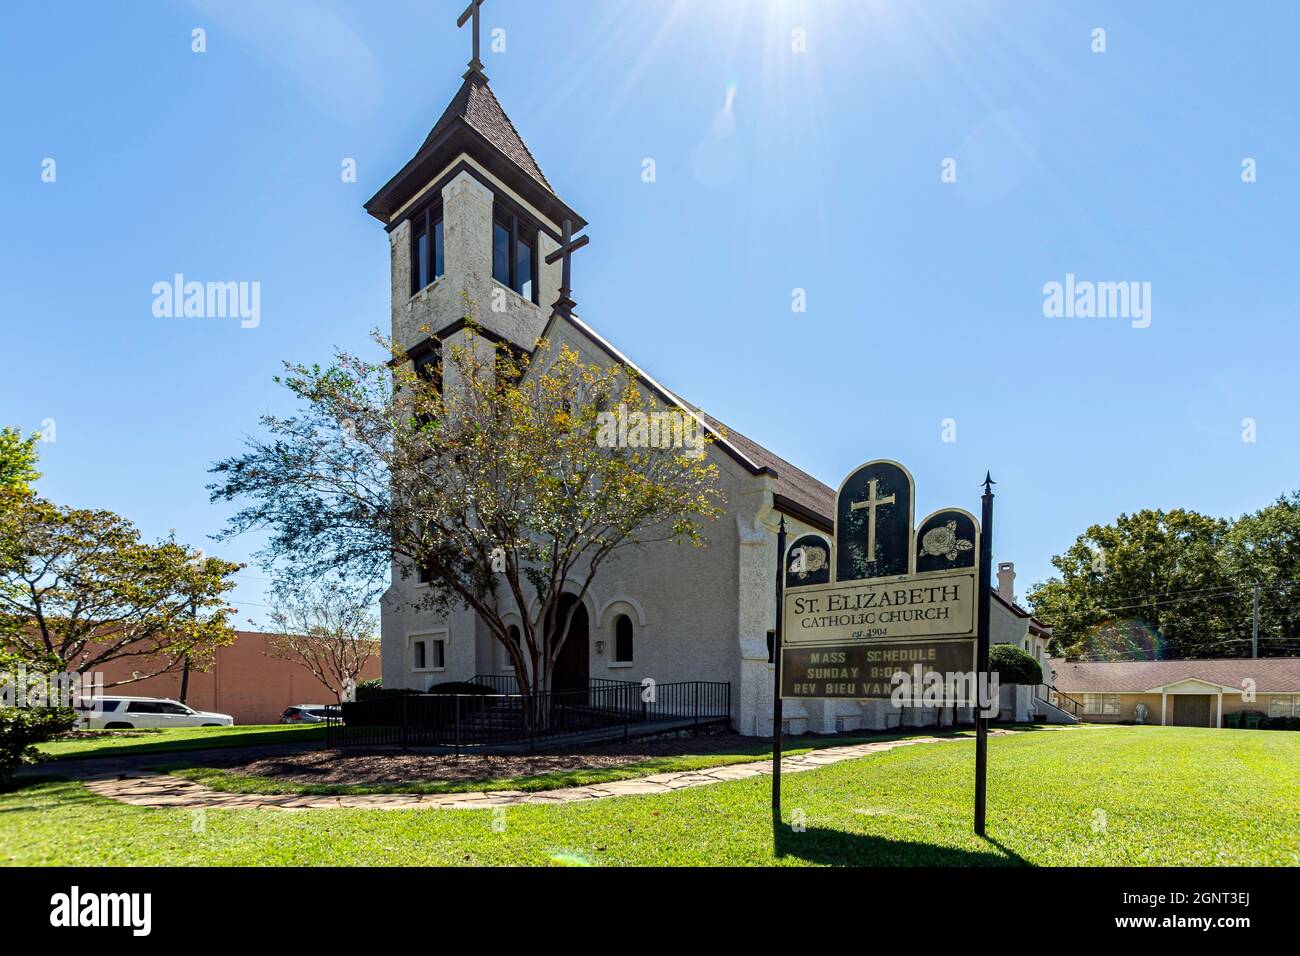 Greenville, Alabama, USA - Sept. 24, 2021: St. Elizabeth Catholic Church in the historic district in Greenville was established in 1904 by Lebanese Ca Stock Photo